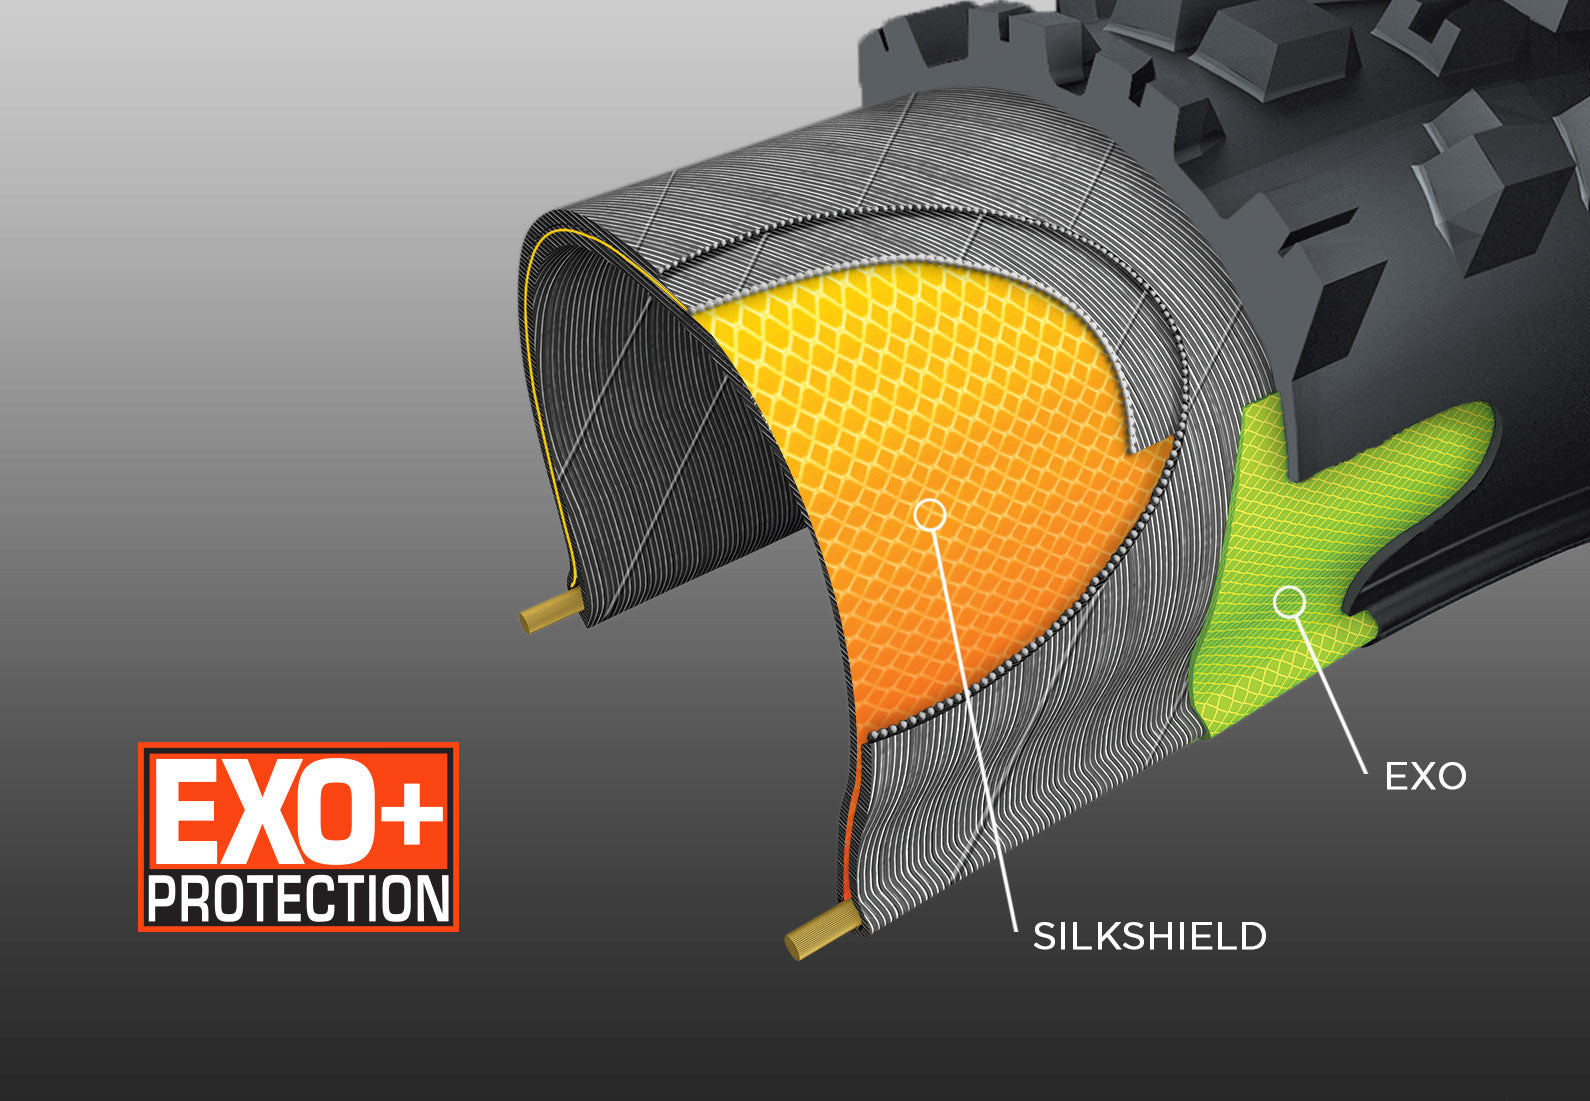 Maxxis EXO+ casing uses their Silkshield layer for added tear protection